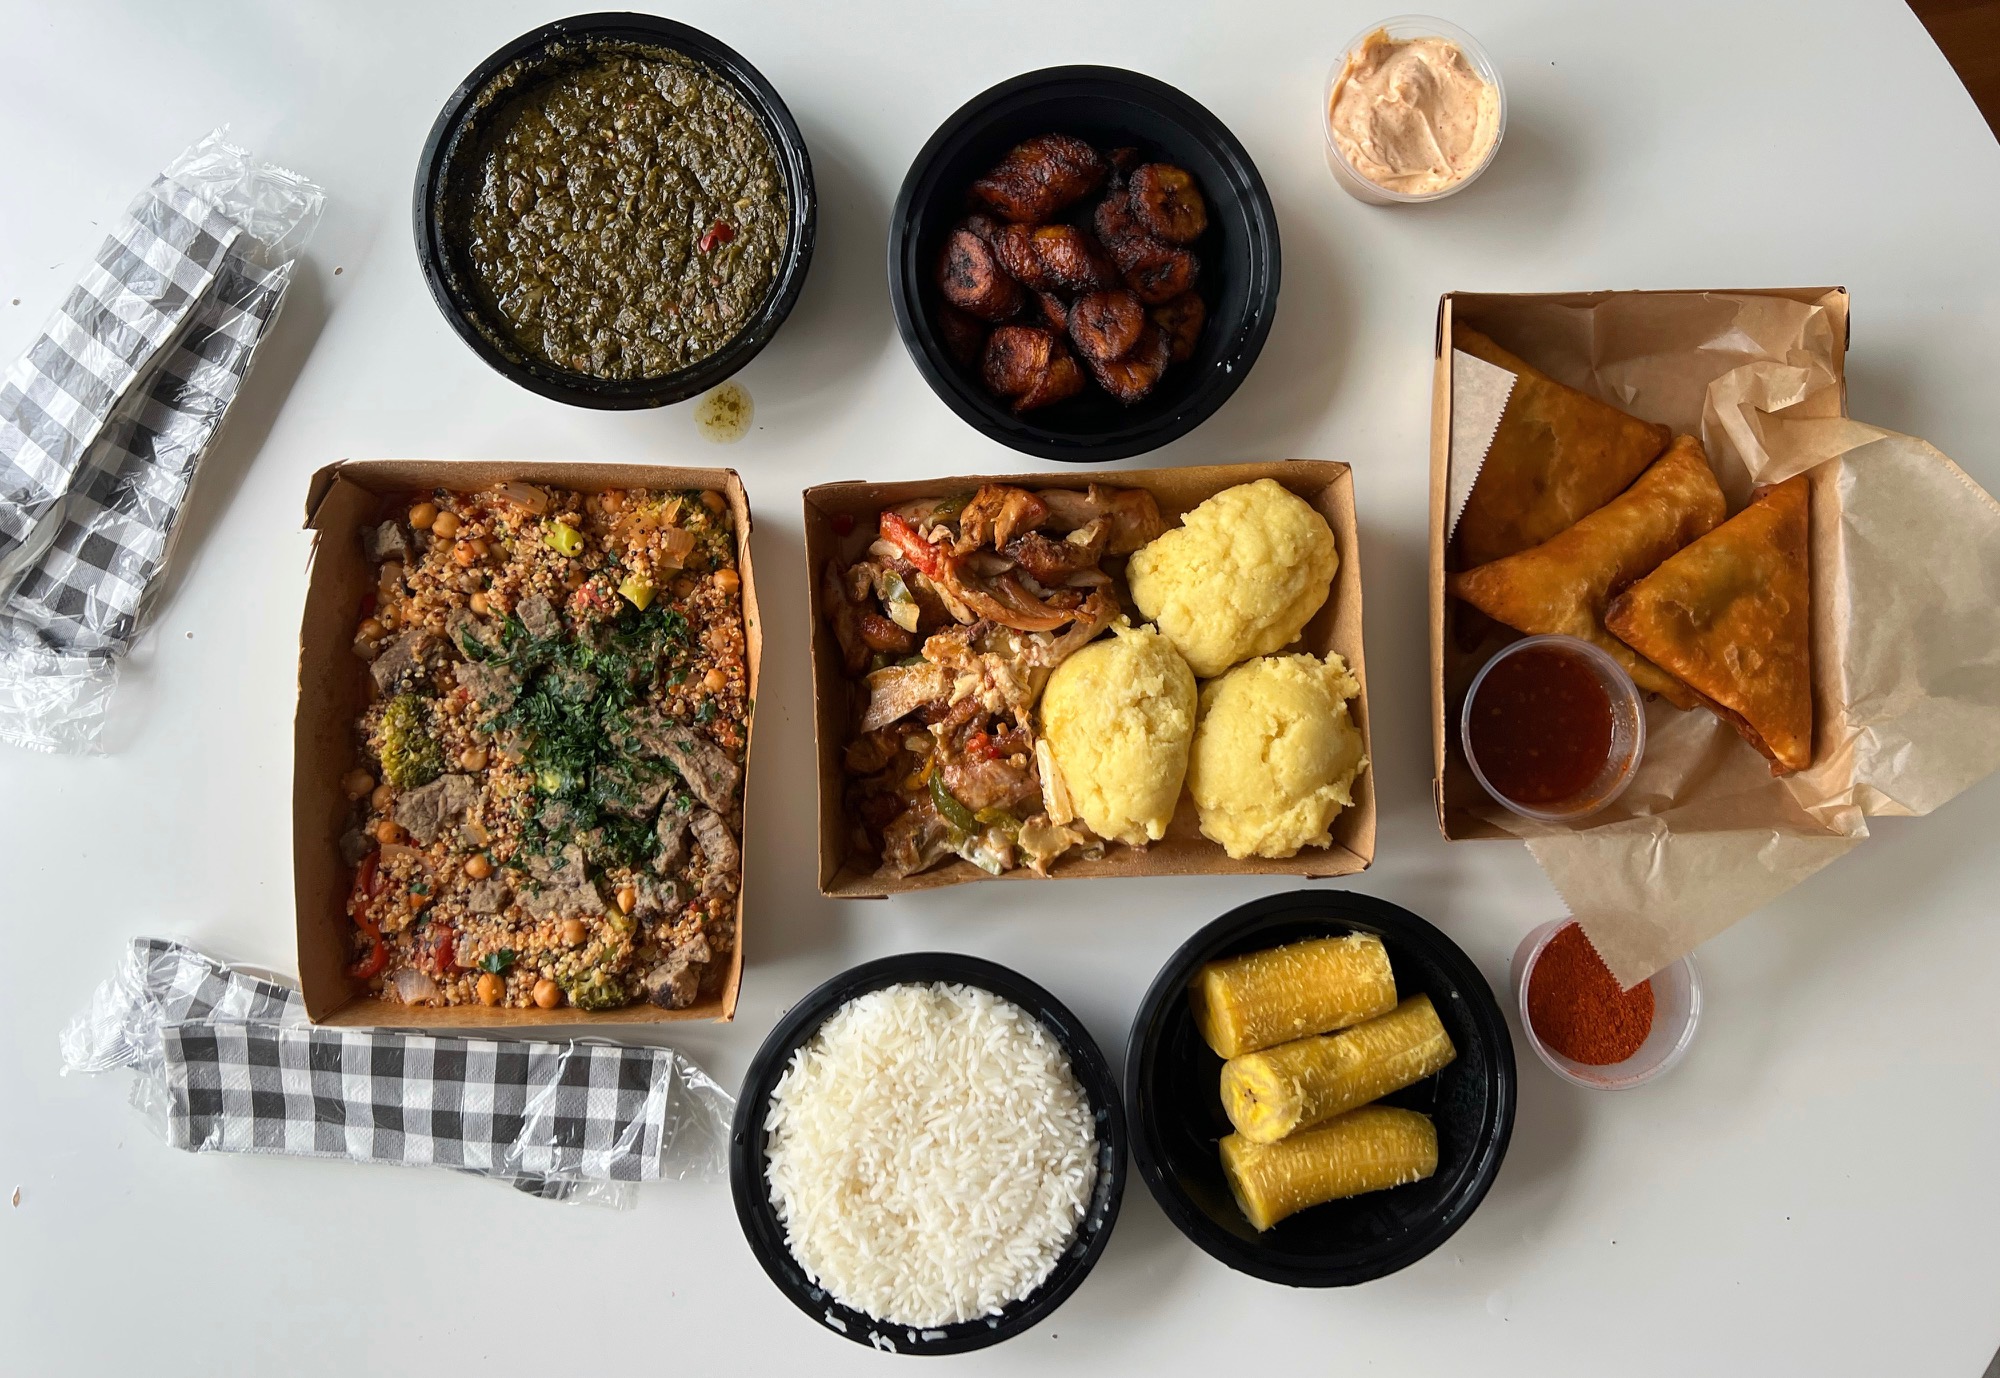 On a white table, the author's lunch is uncovered revealing various African dishes. Photo by Alyssa Buckley.